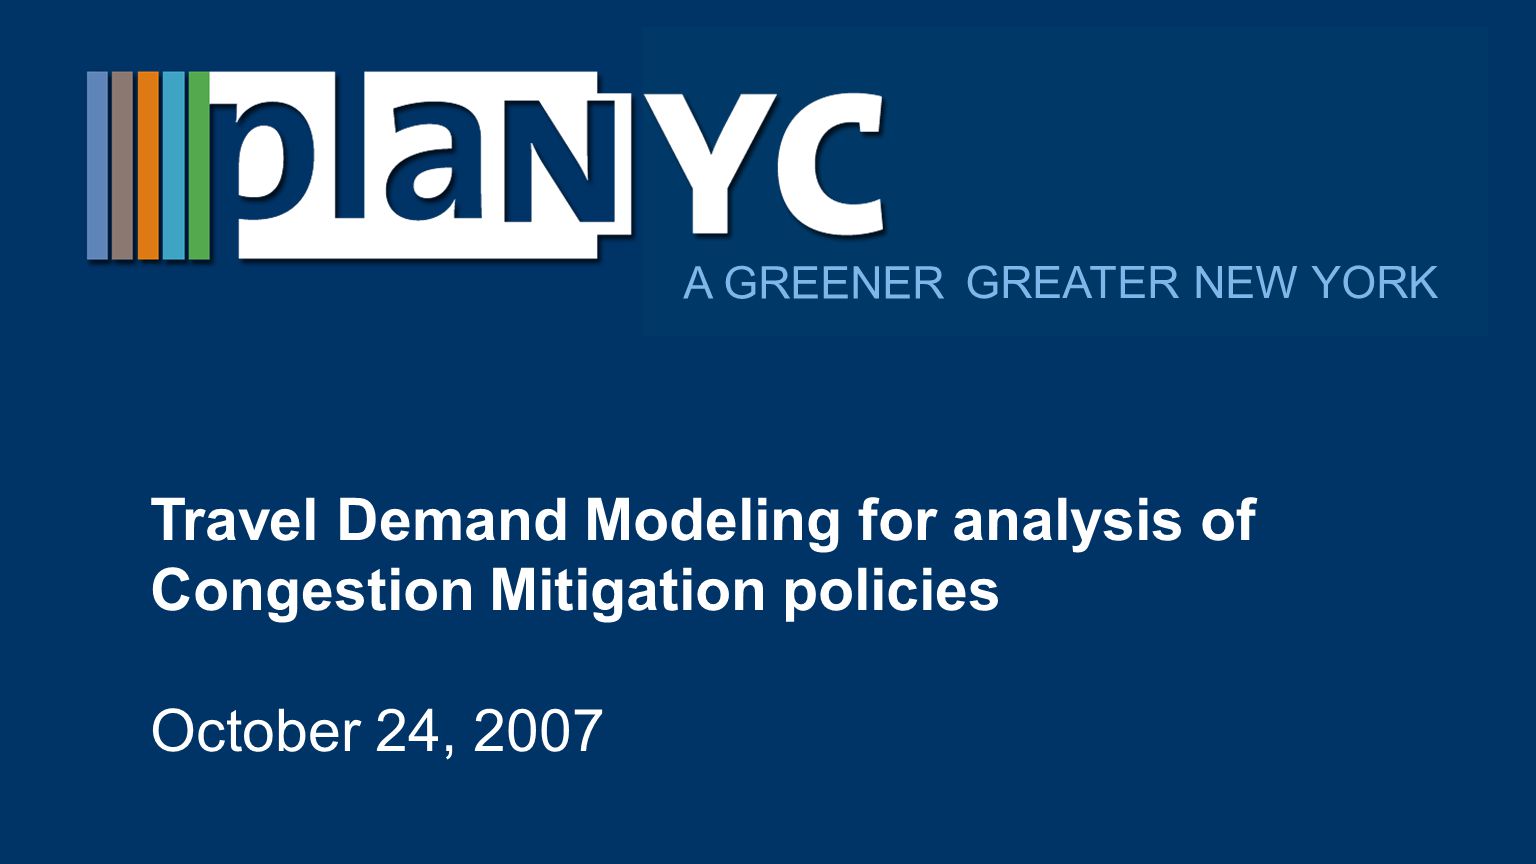 GREATER NEW YORK A GREENER Travel Demand Modeling for analysis of Congestion Mitigation policies October 24, 2007